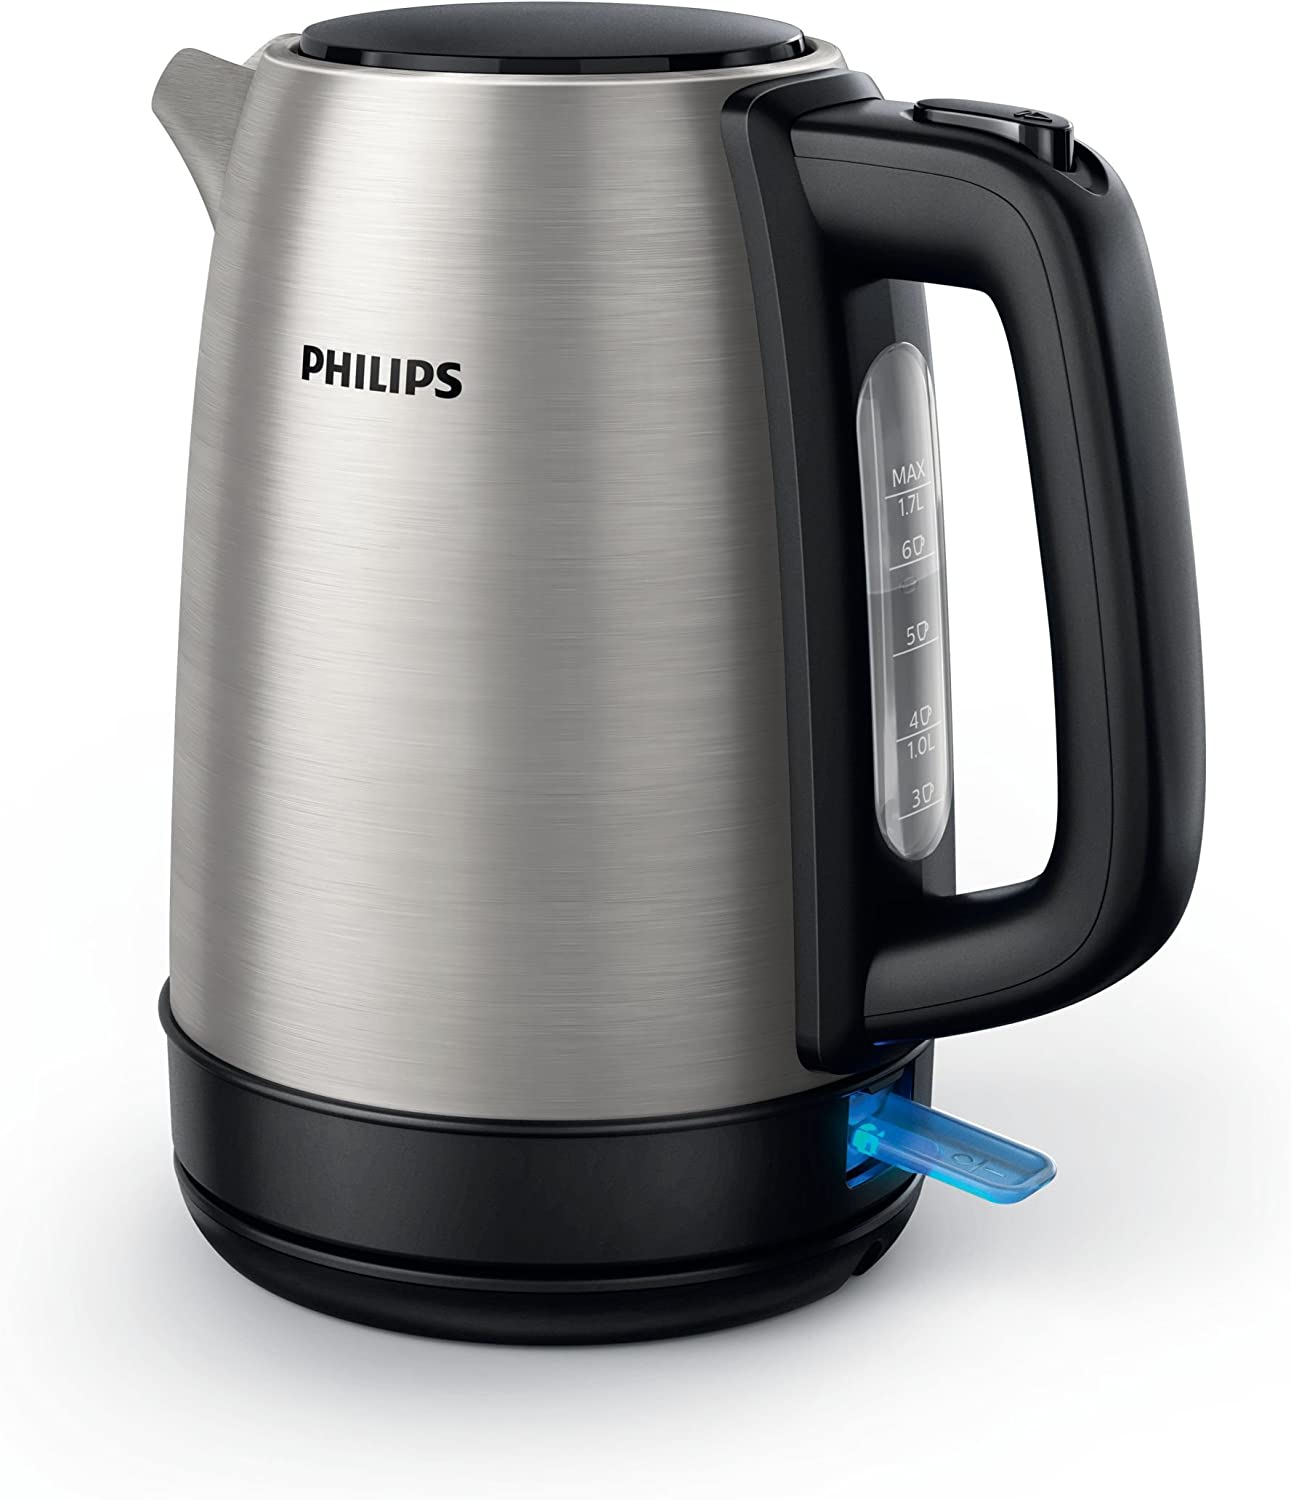 Philips Domestic Appliances Philips Daily Collection HD9350/91 Kettle